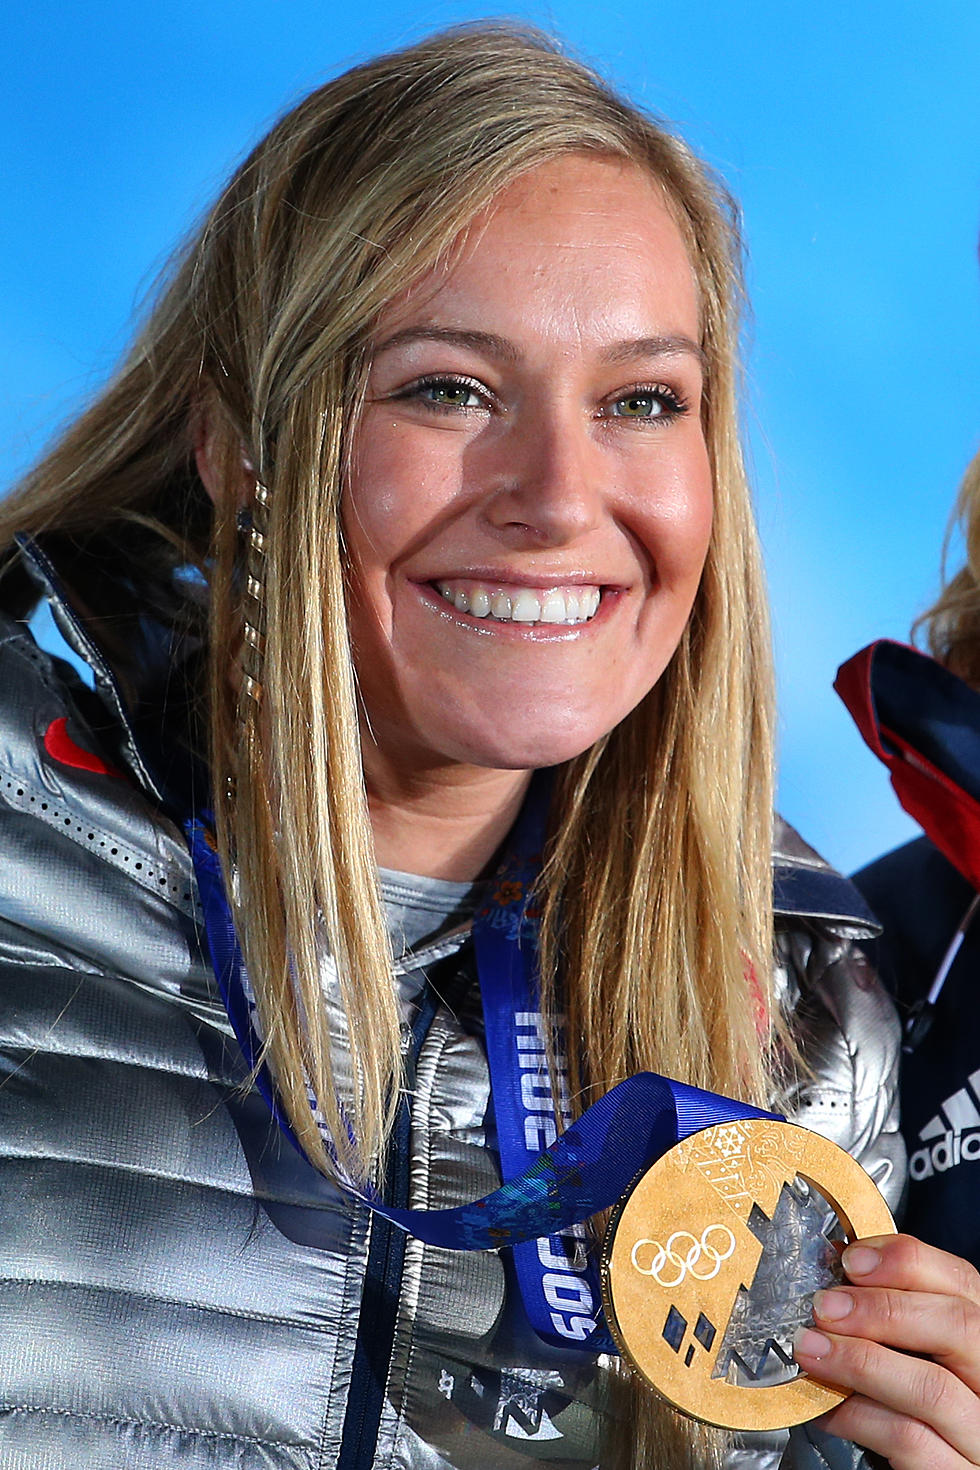 Winter Olympics: Jamie Anderson’s Sacrifices Pay Off with Slopestyle Gold